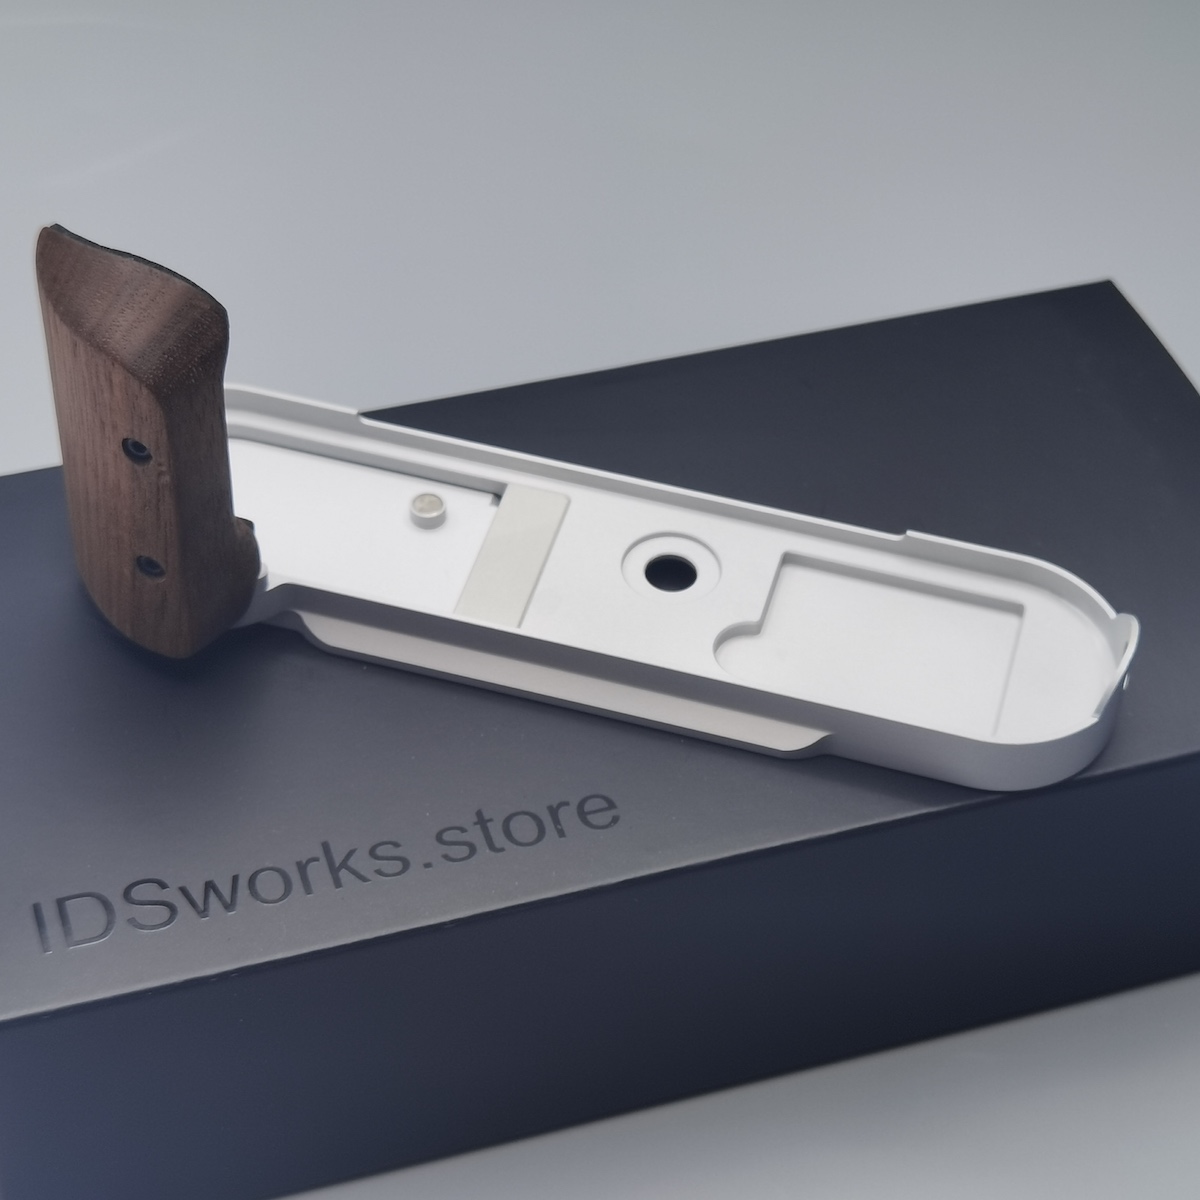 IDSWorks announced a new slimmed-down & cheaper 